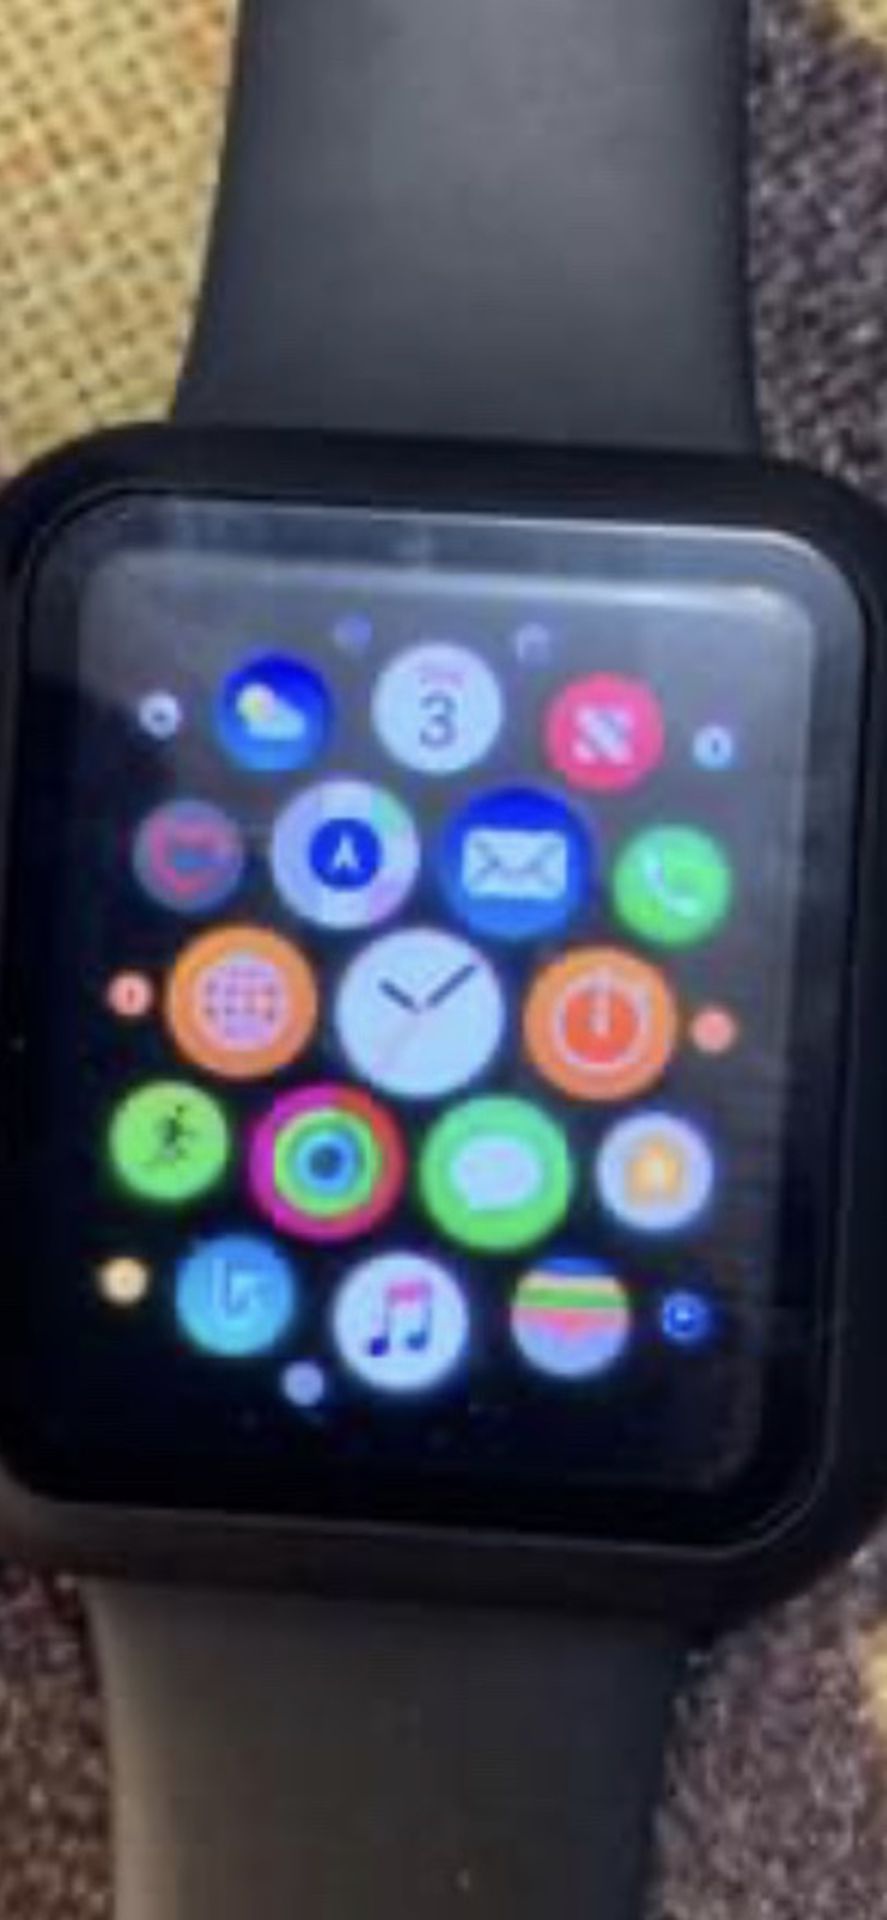 Apple Watch Gen 2 With Charger & Screen Protector